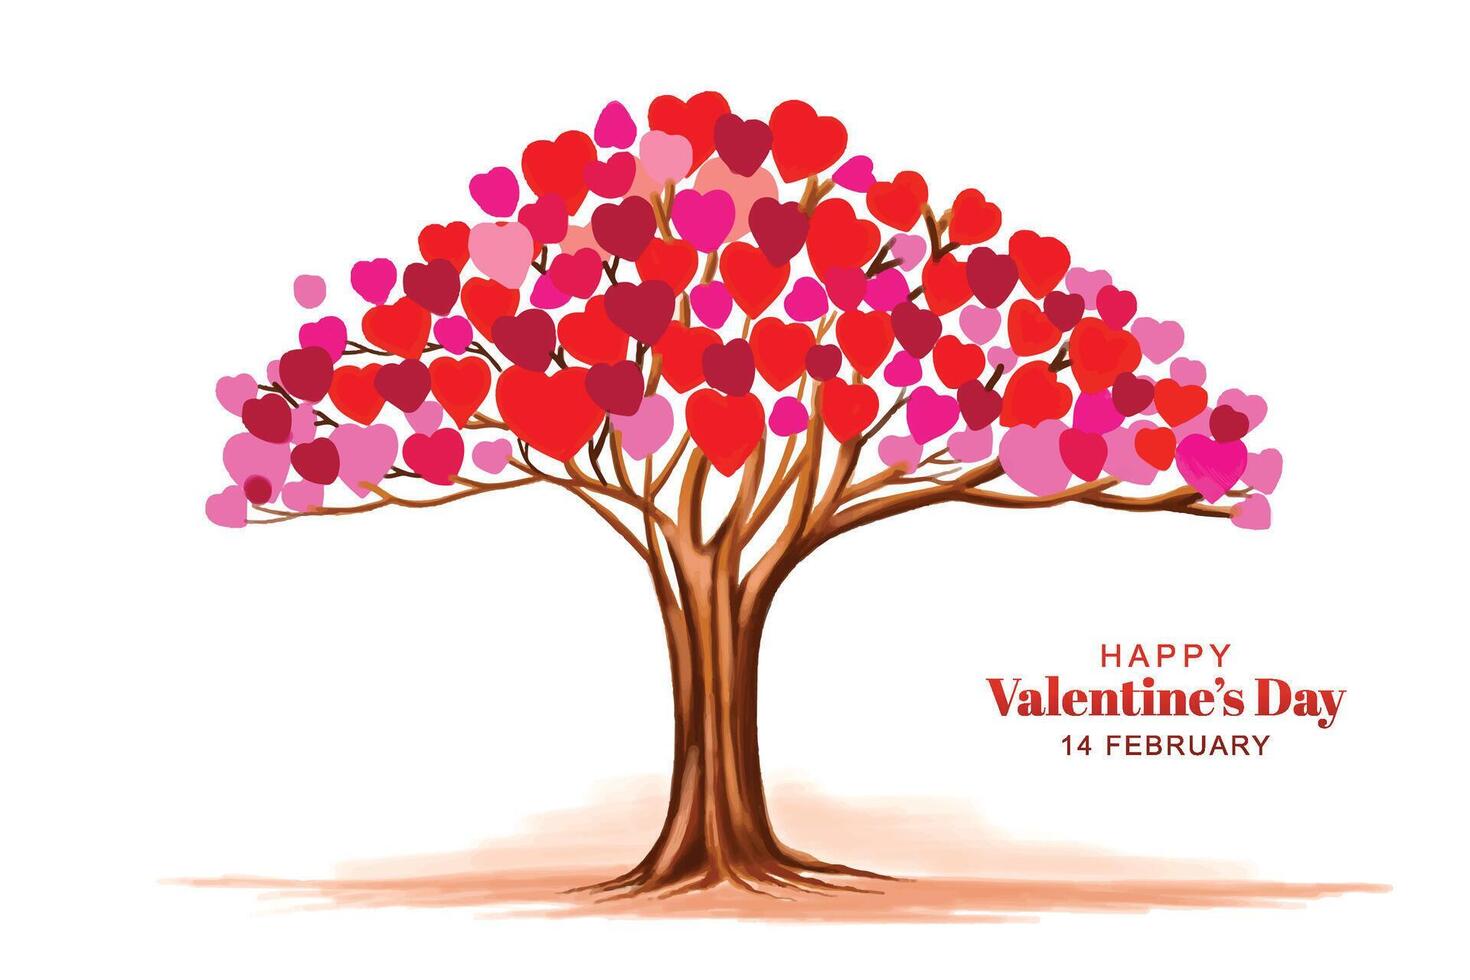 Beautiful heart shape tree valentines day card design vector